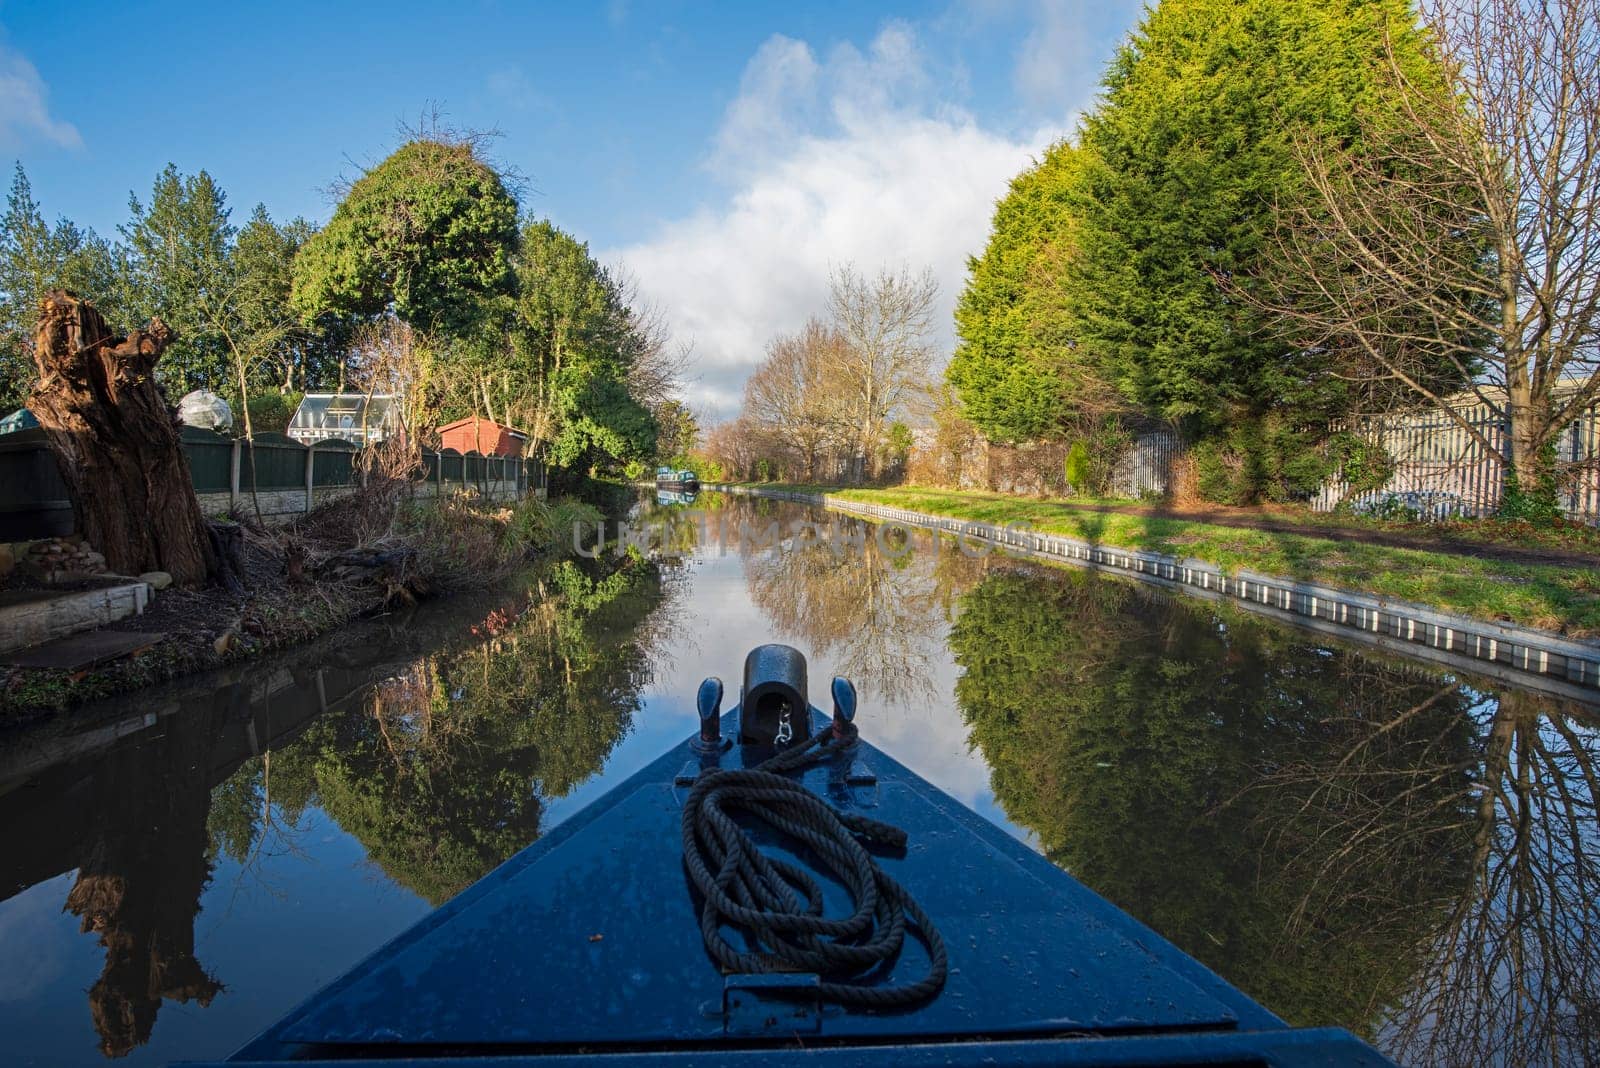 Narrowboat on a British canal in rural setting by paulvinten